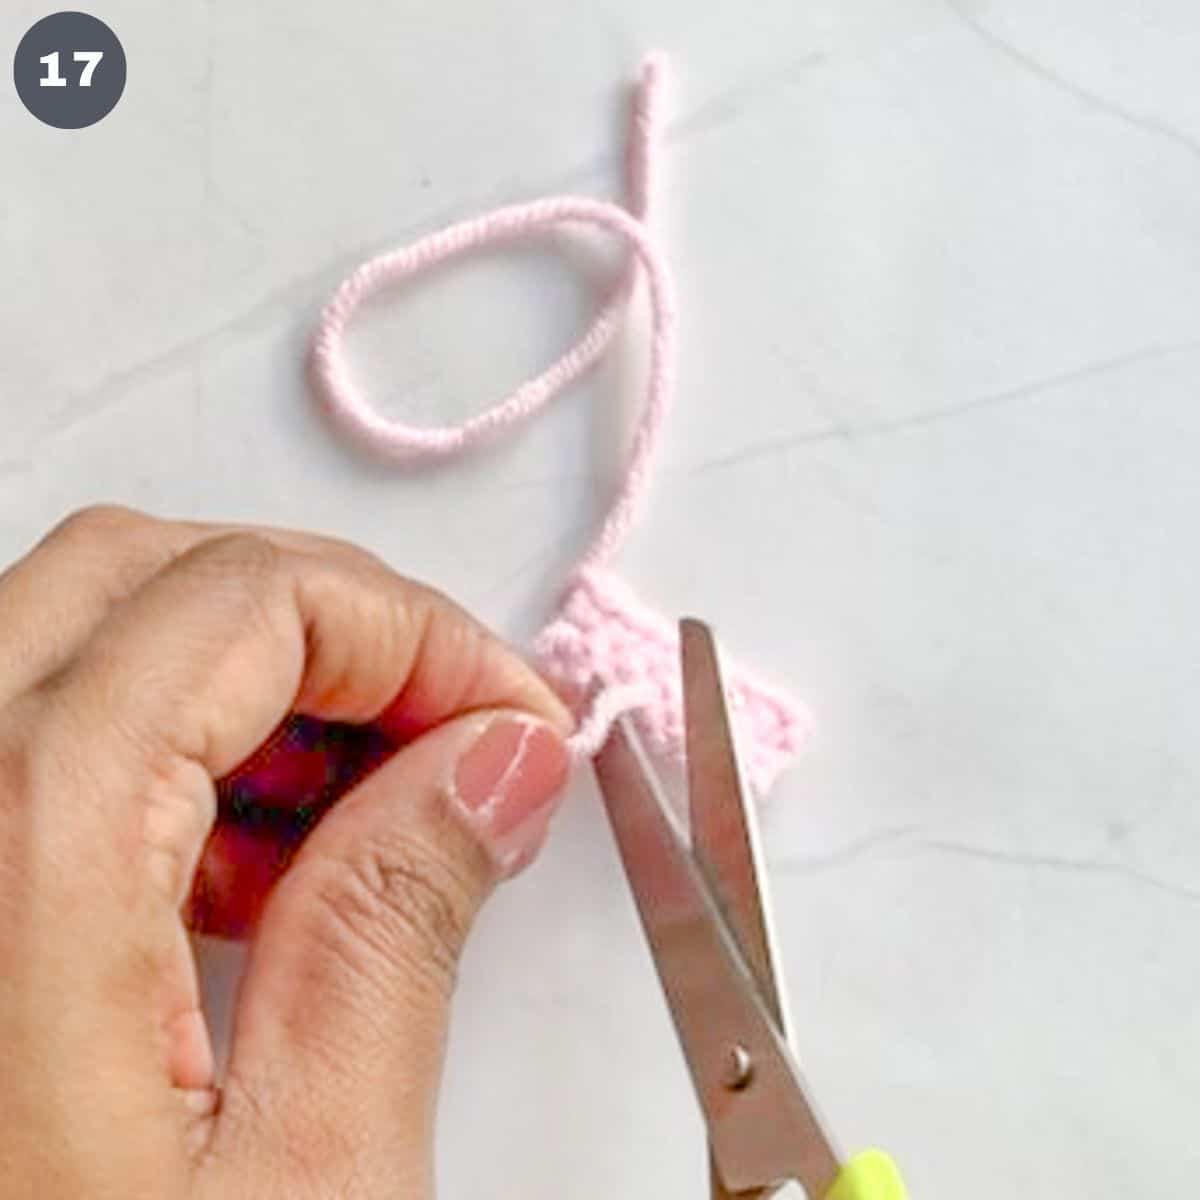 Cutting excess yarn with scissors.